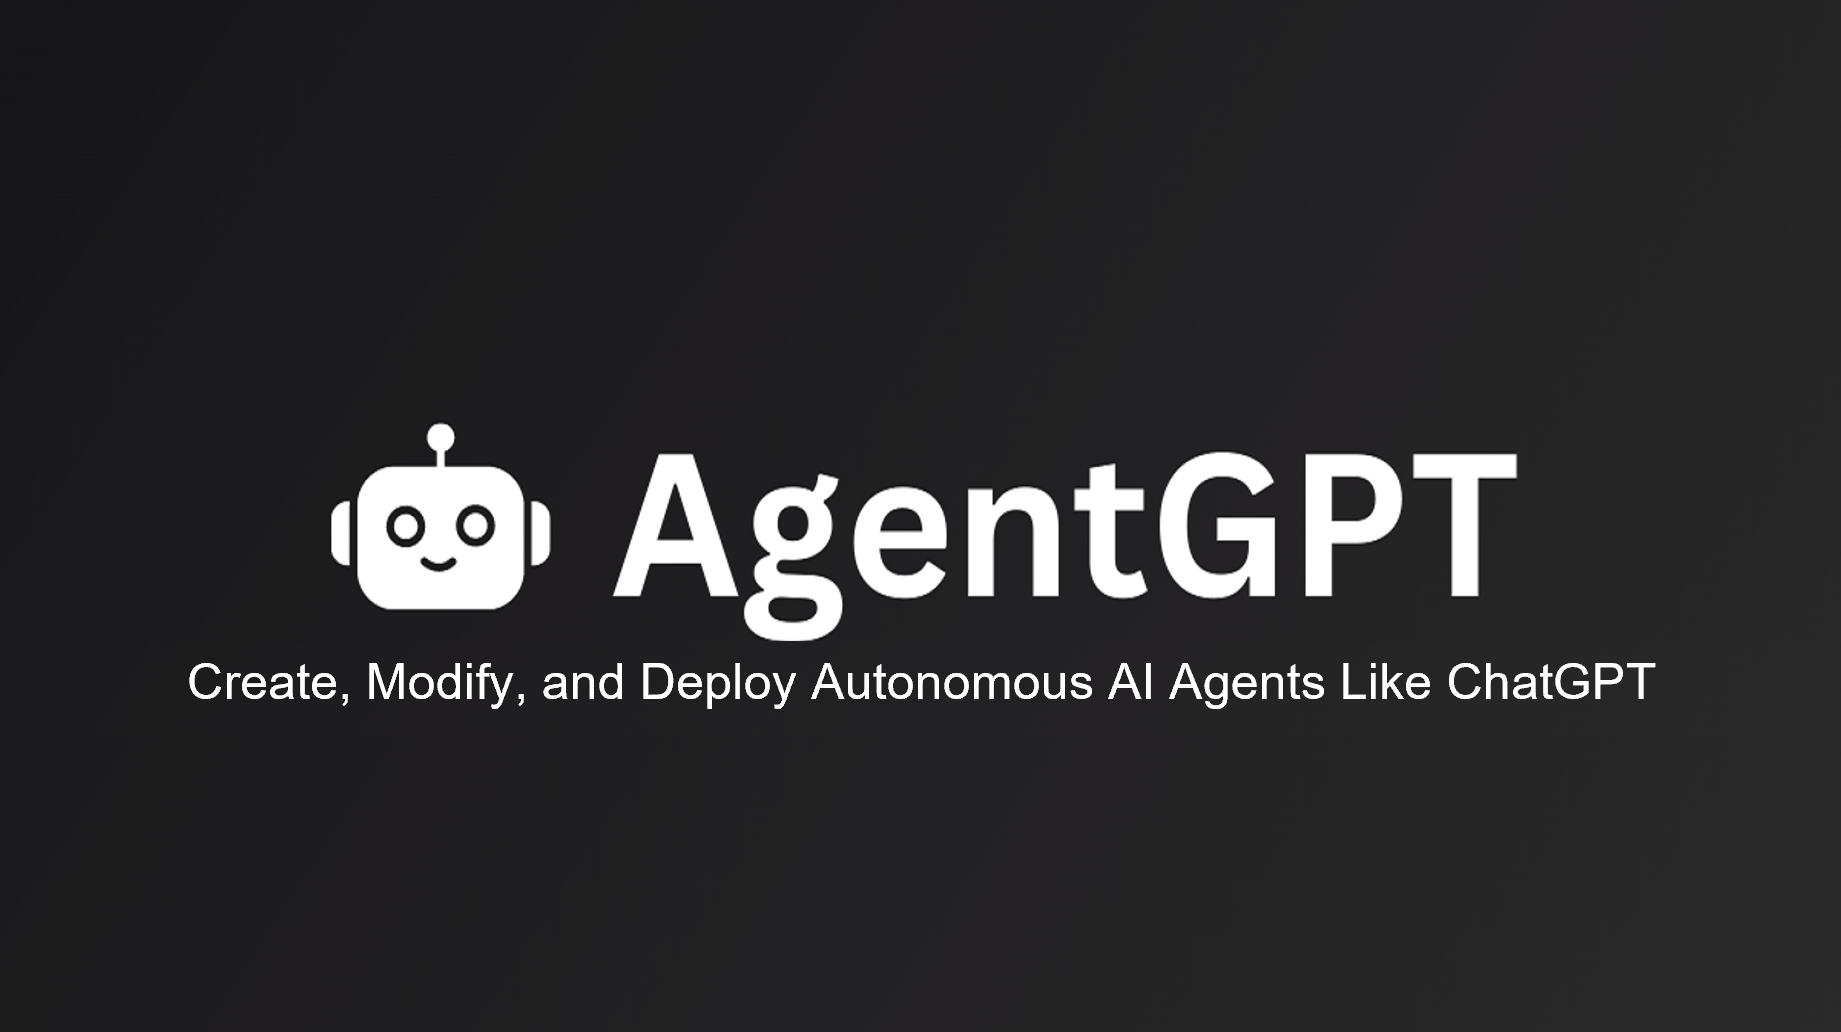 Meet AgentGPT, which can create chatbots, automate things, and more!